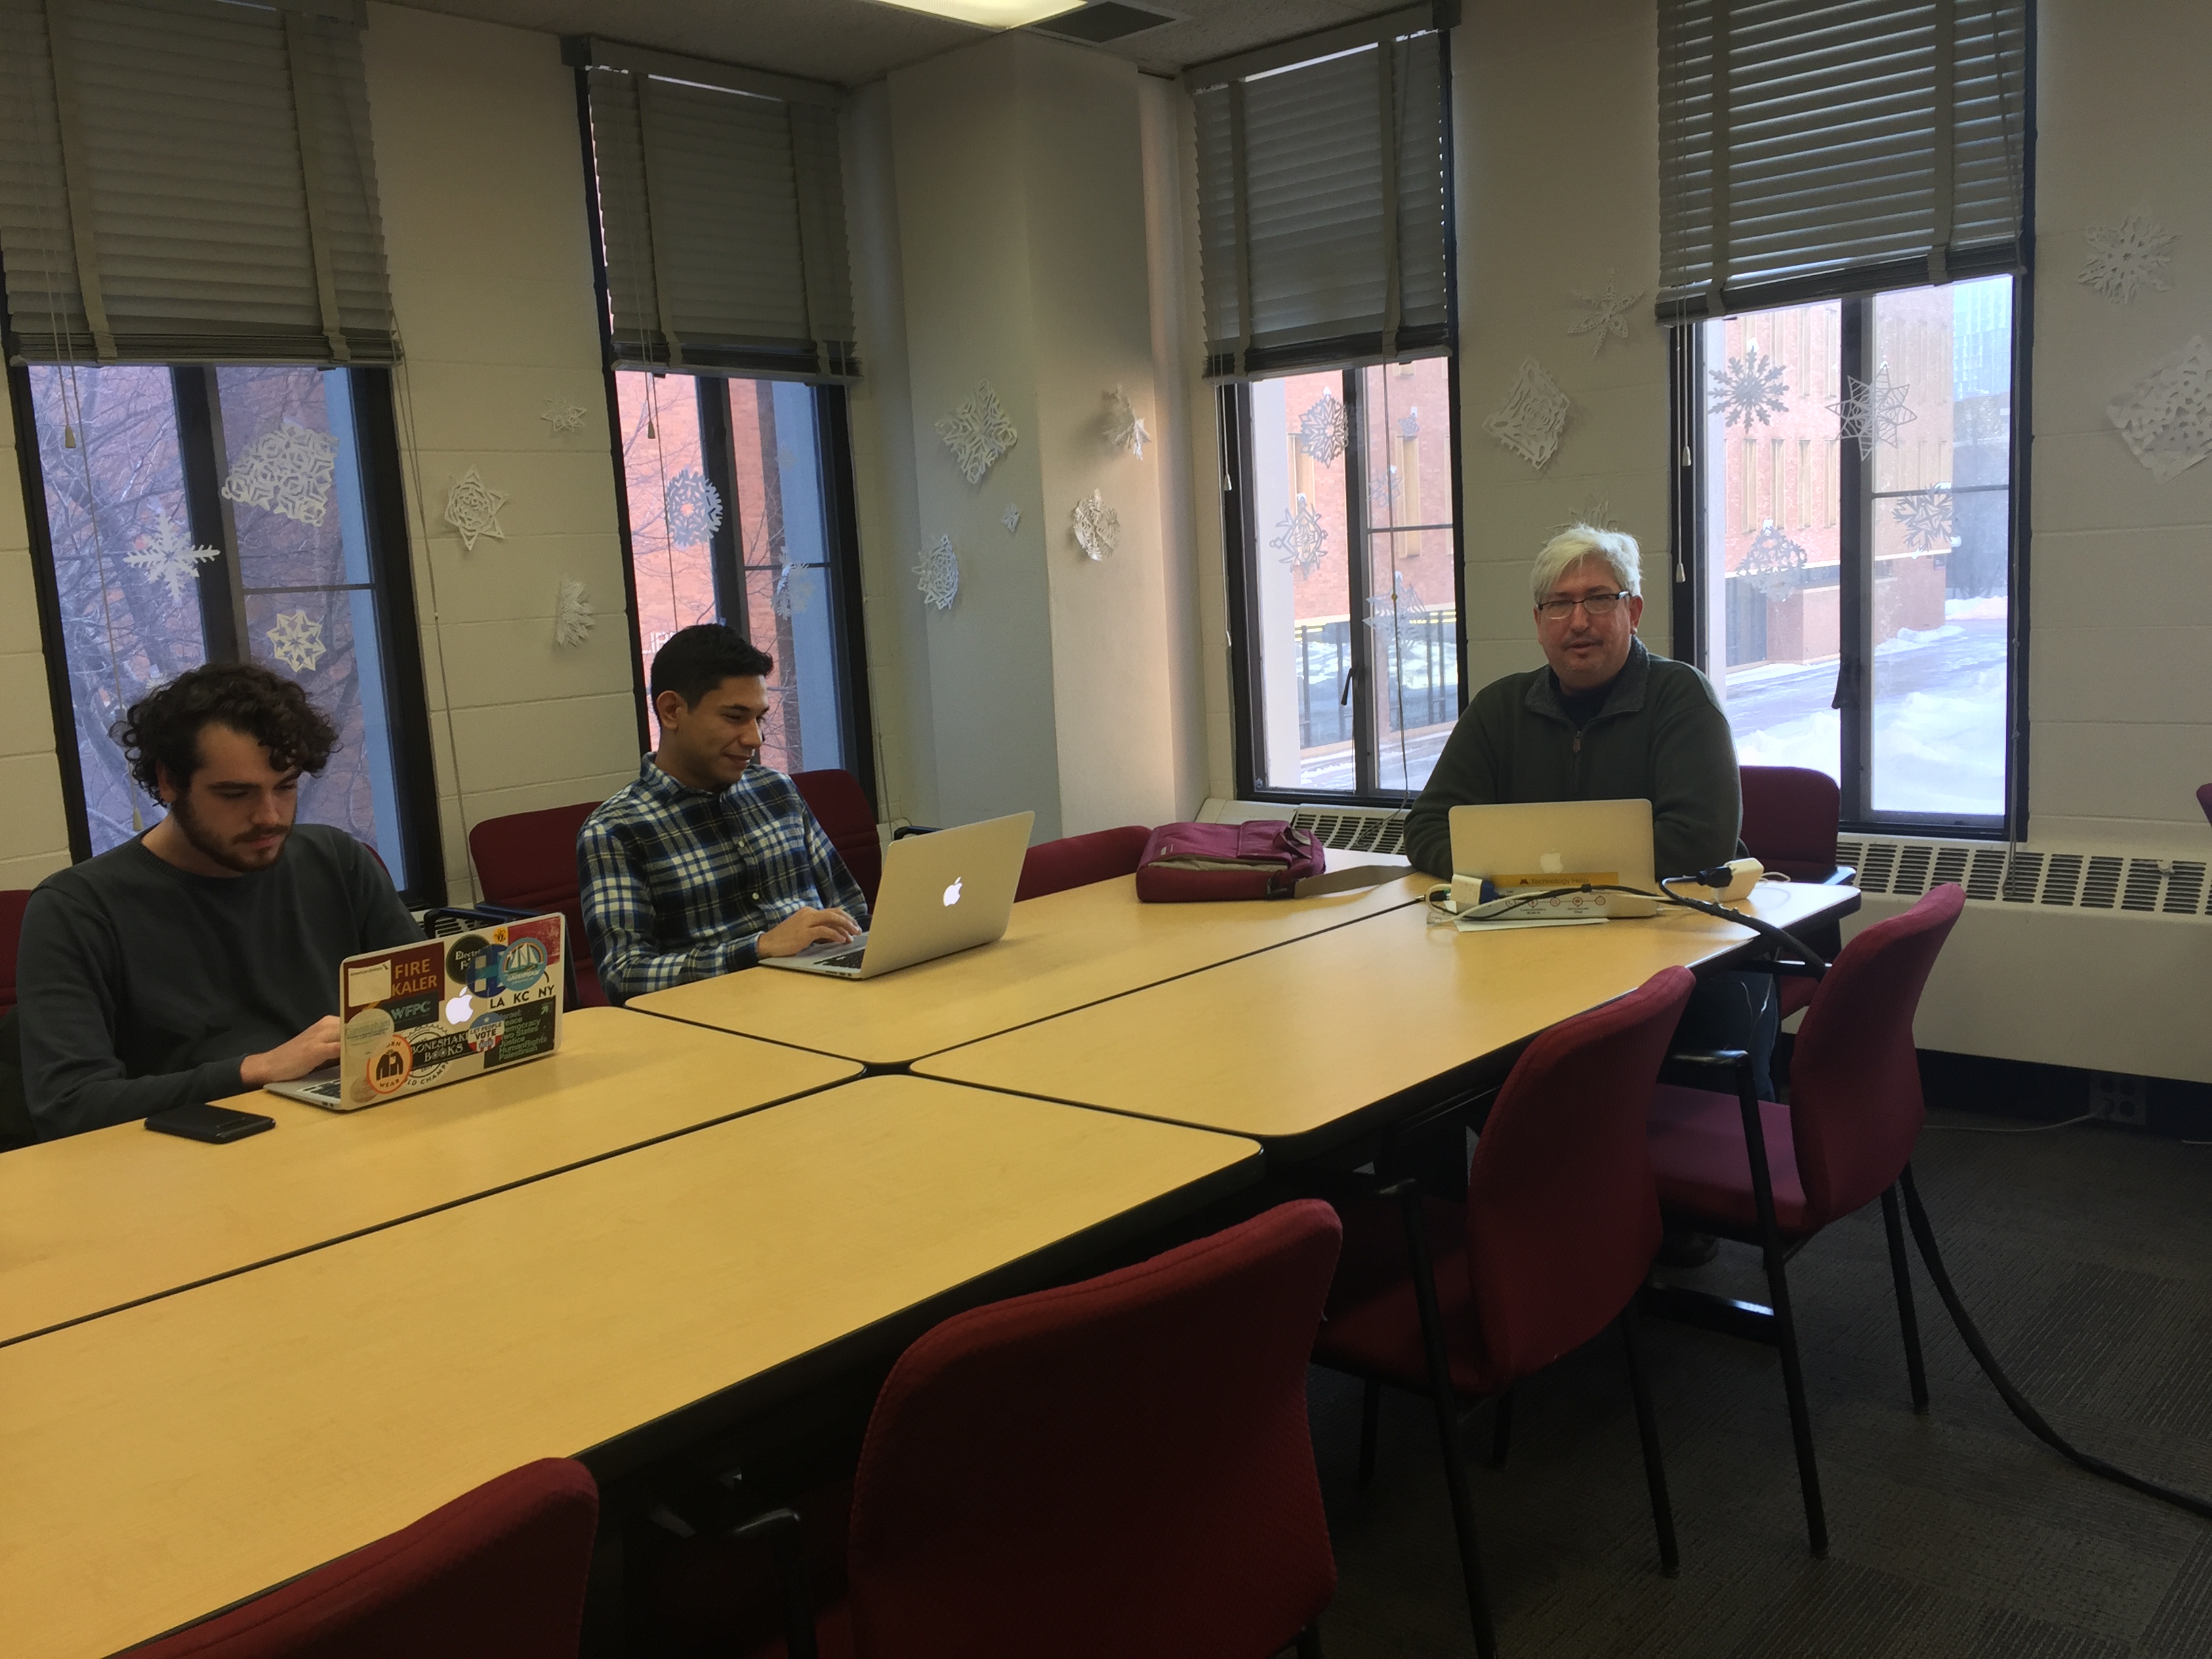 White male professor meeting with two male students